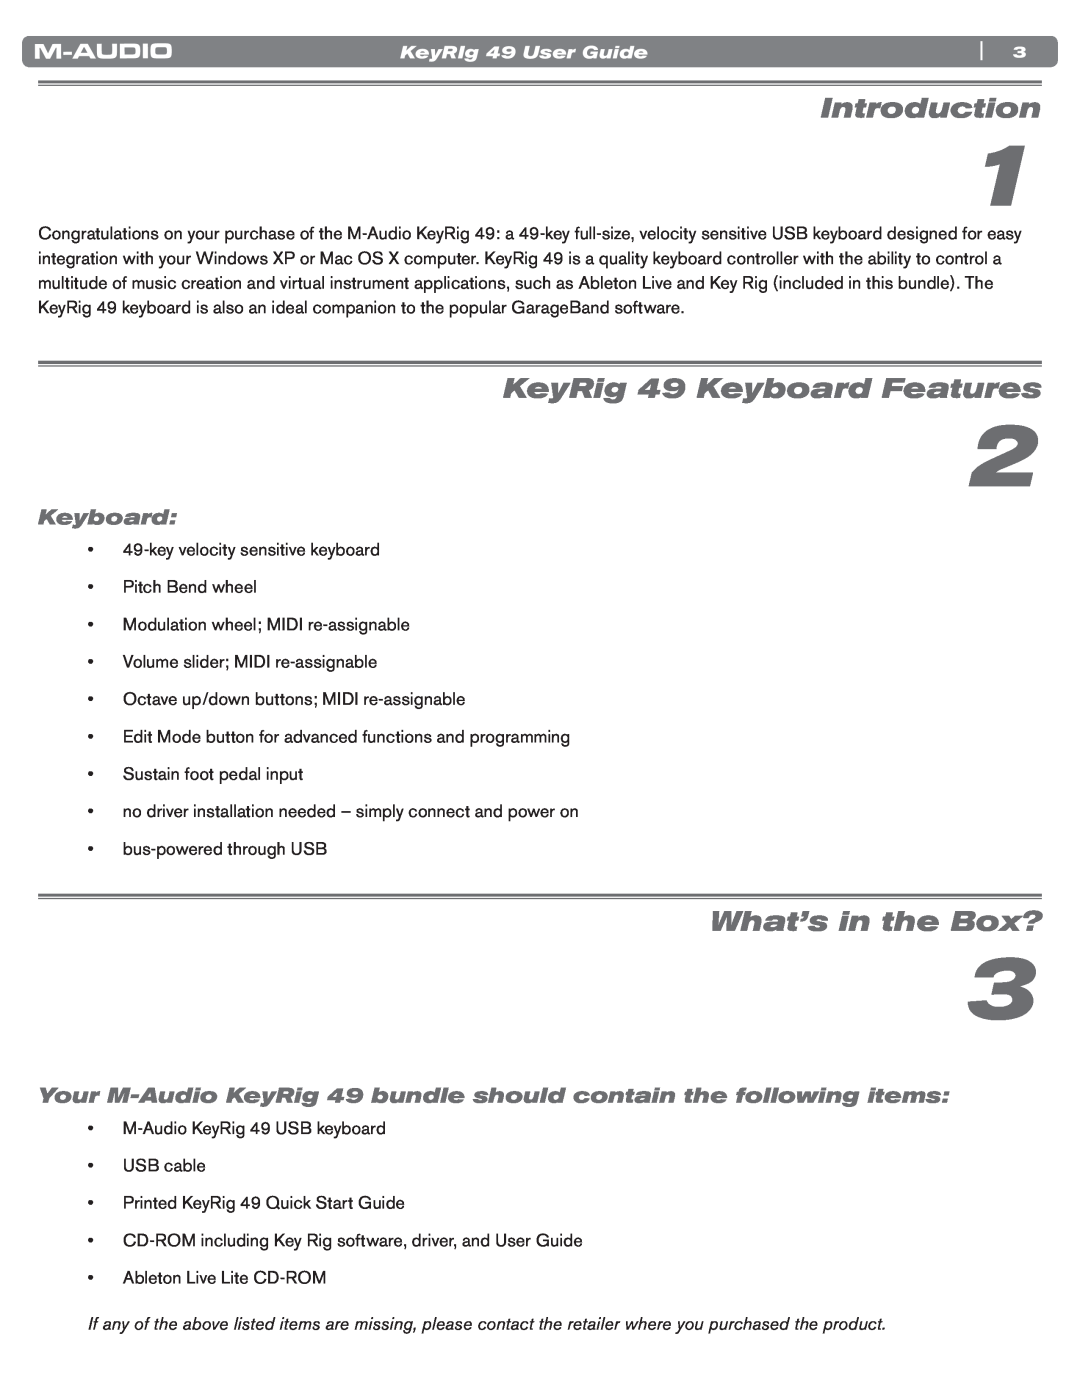 M-Audio manual Introduction, KeyRig 49 Keyboard Features, What’s in the Box?, KeyRIg 49 User Guide 